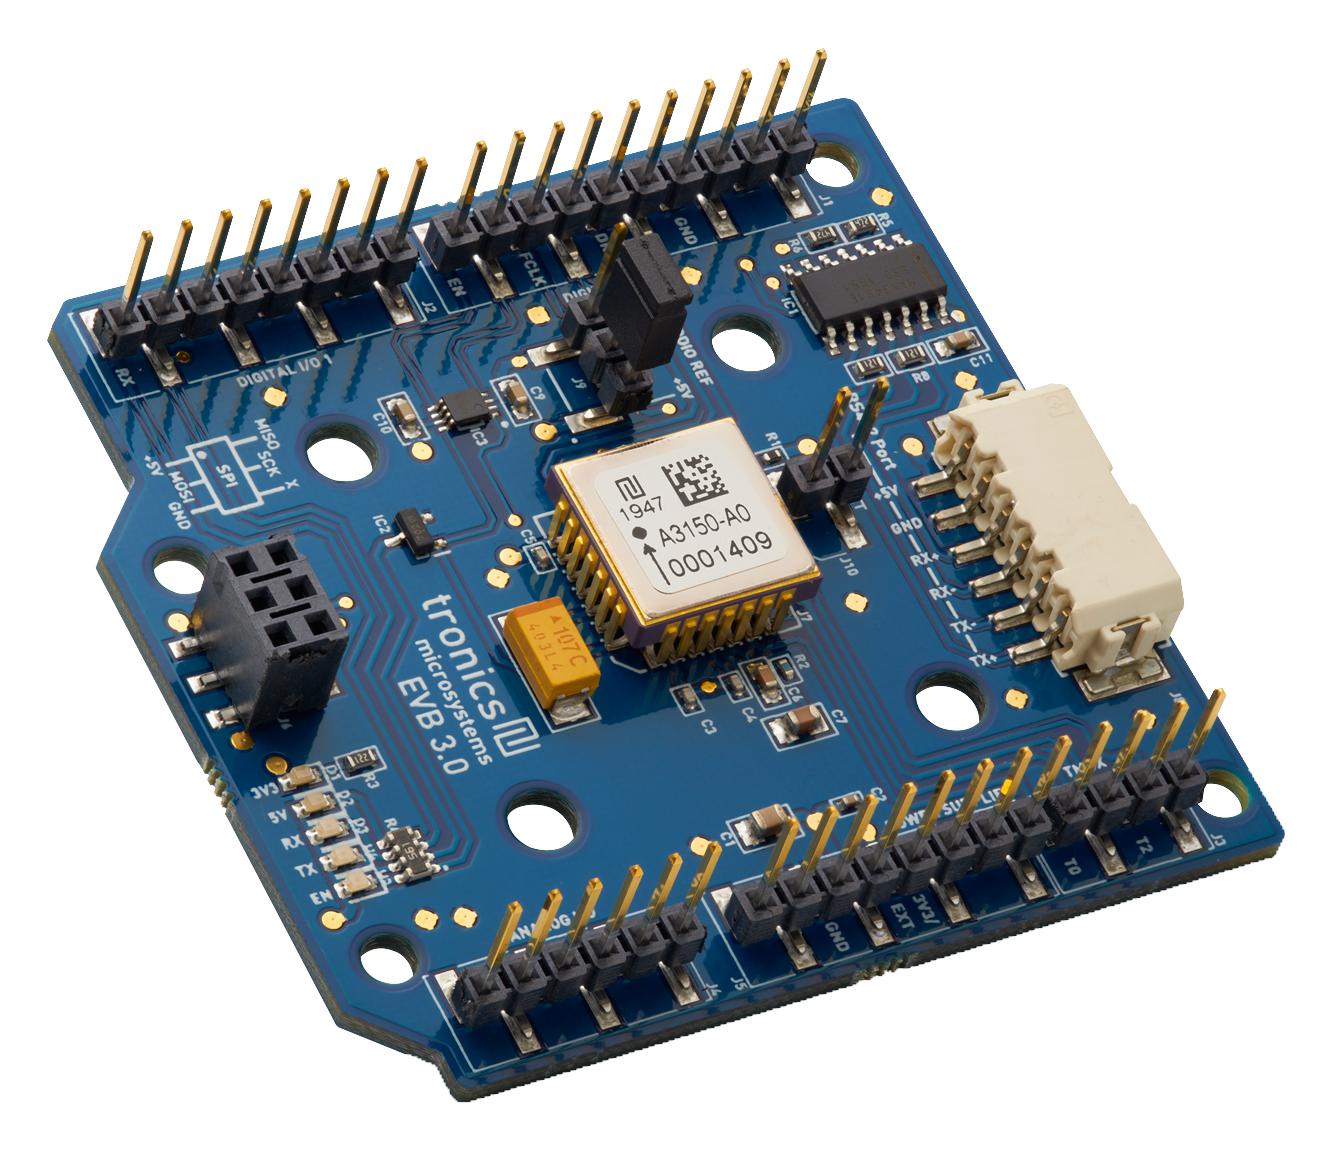 Tronics 4-A3150-A0 Eval Board, 1-Axis Accelerometer